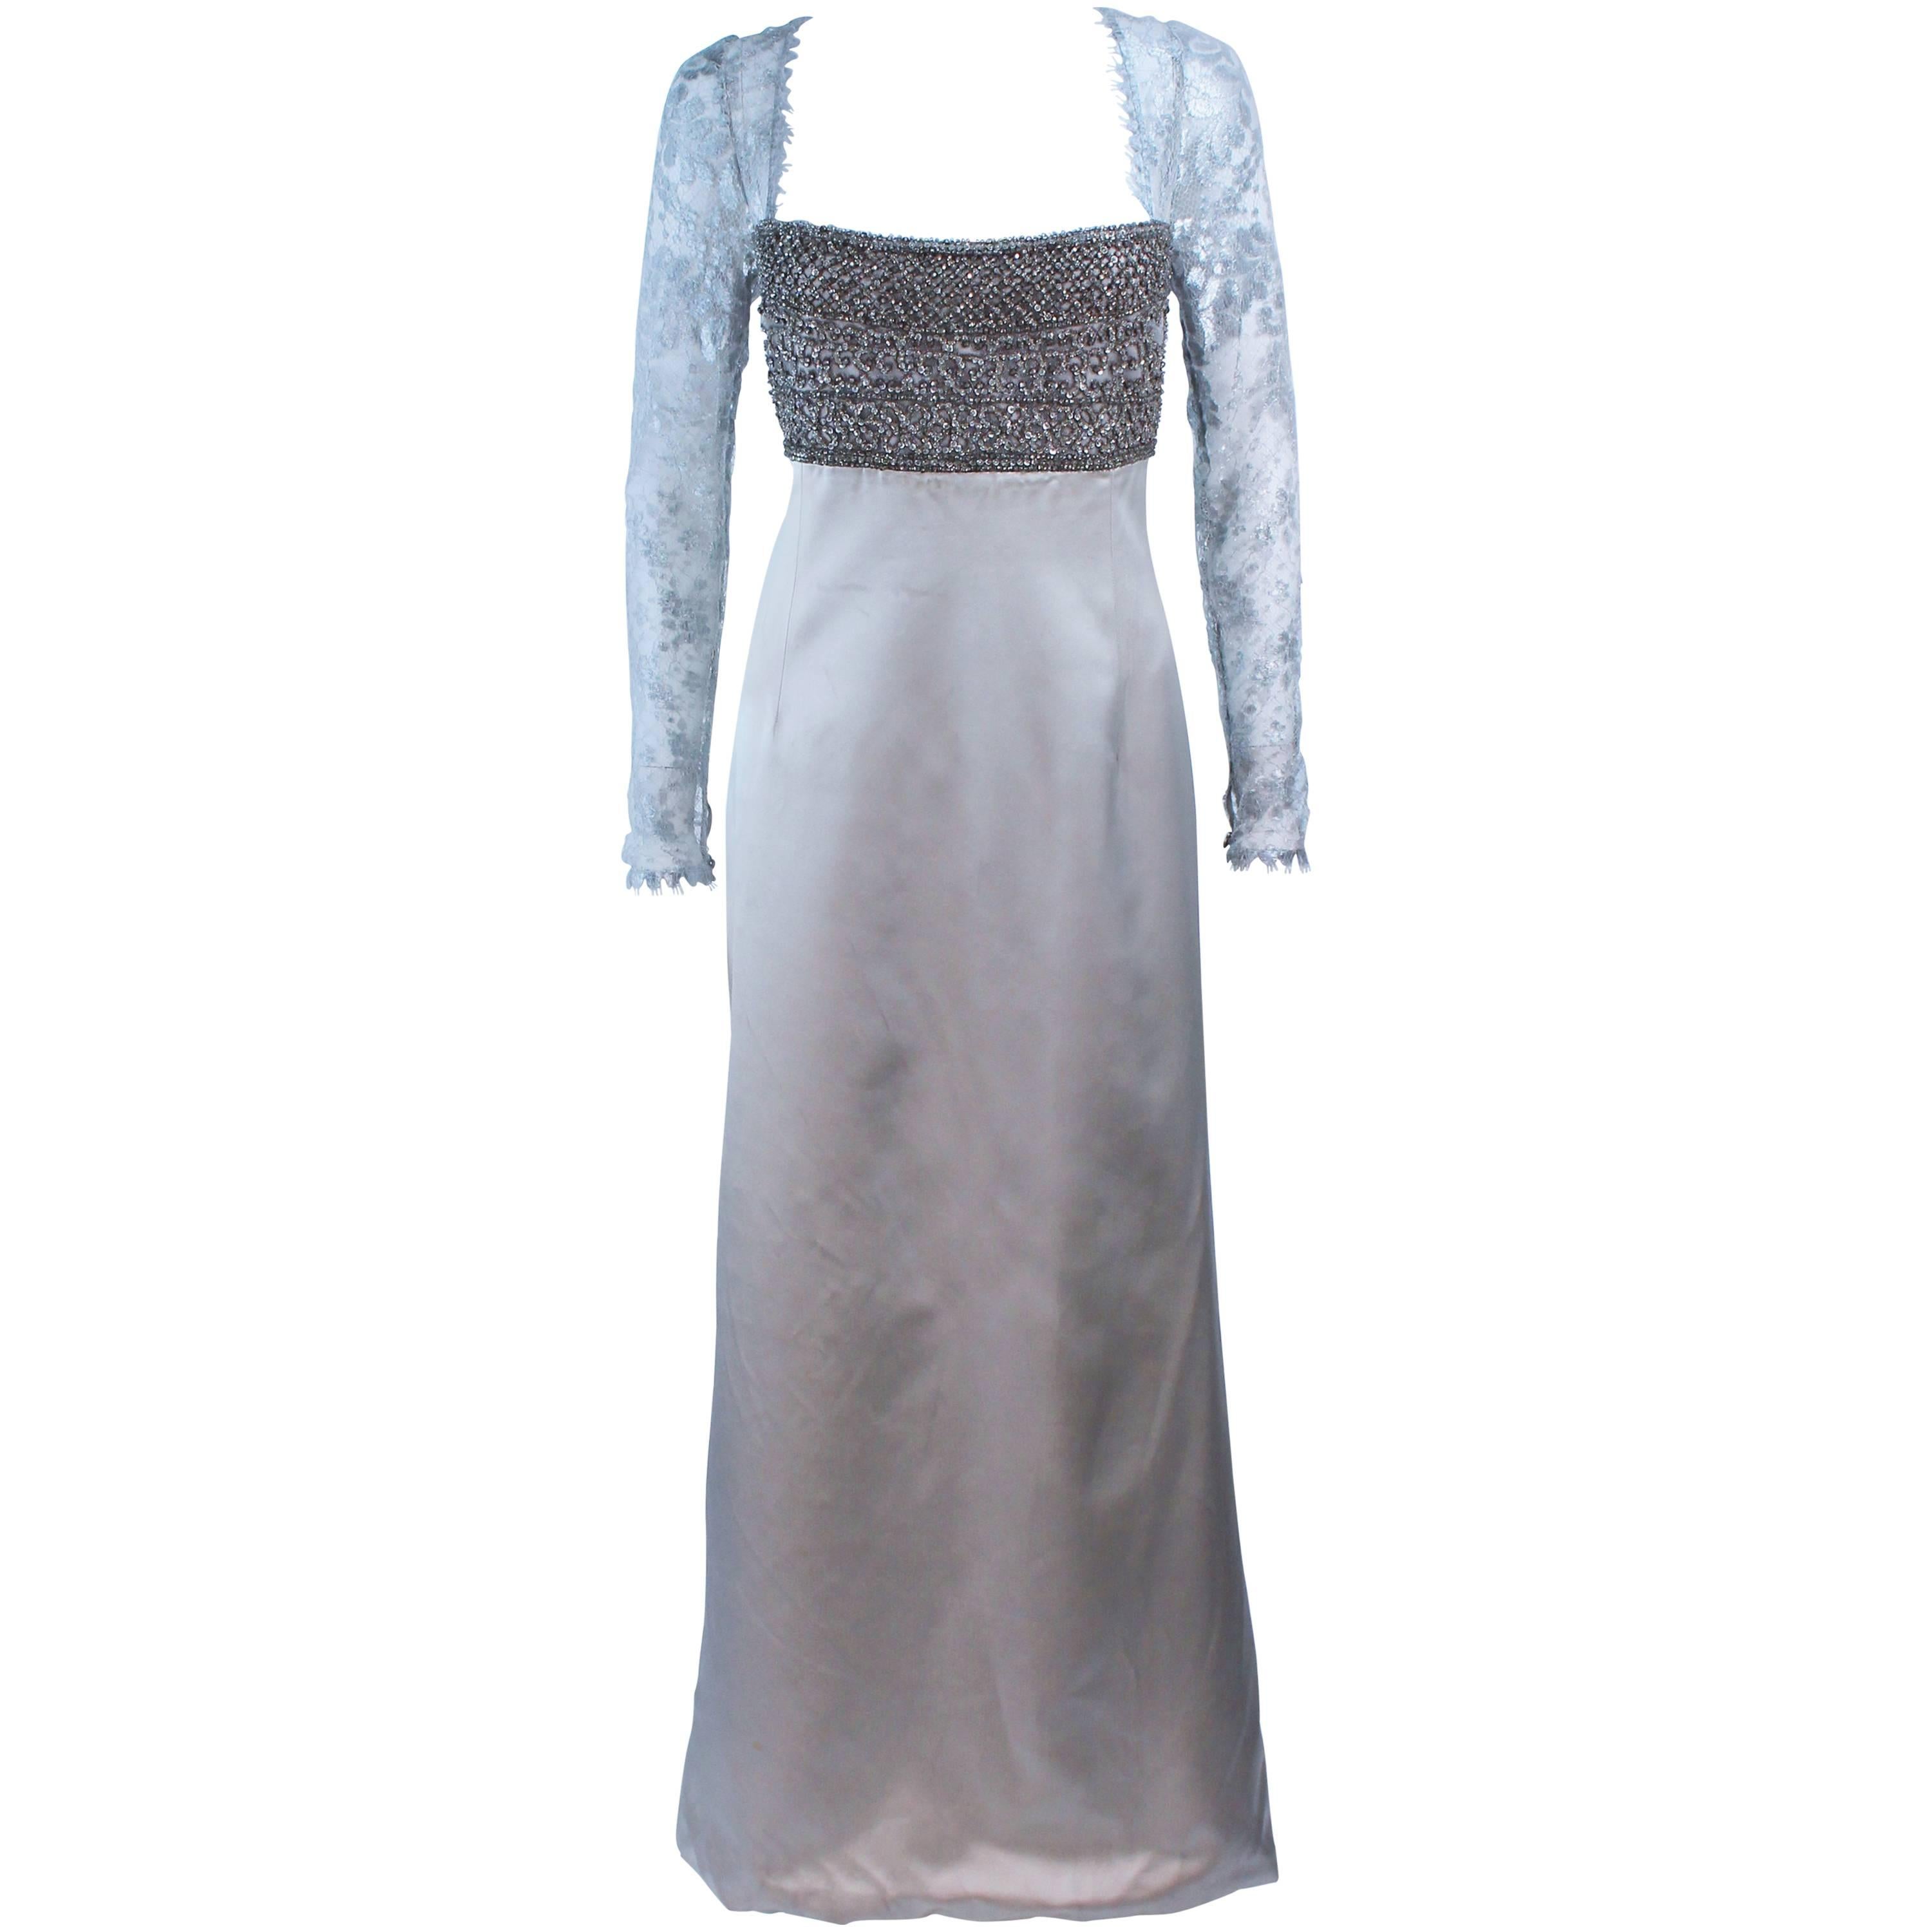 BADGLEY MISCHKA Silver Beaded Lace and Satin Gown Size 10